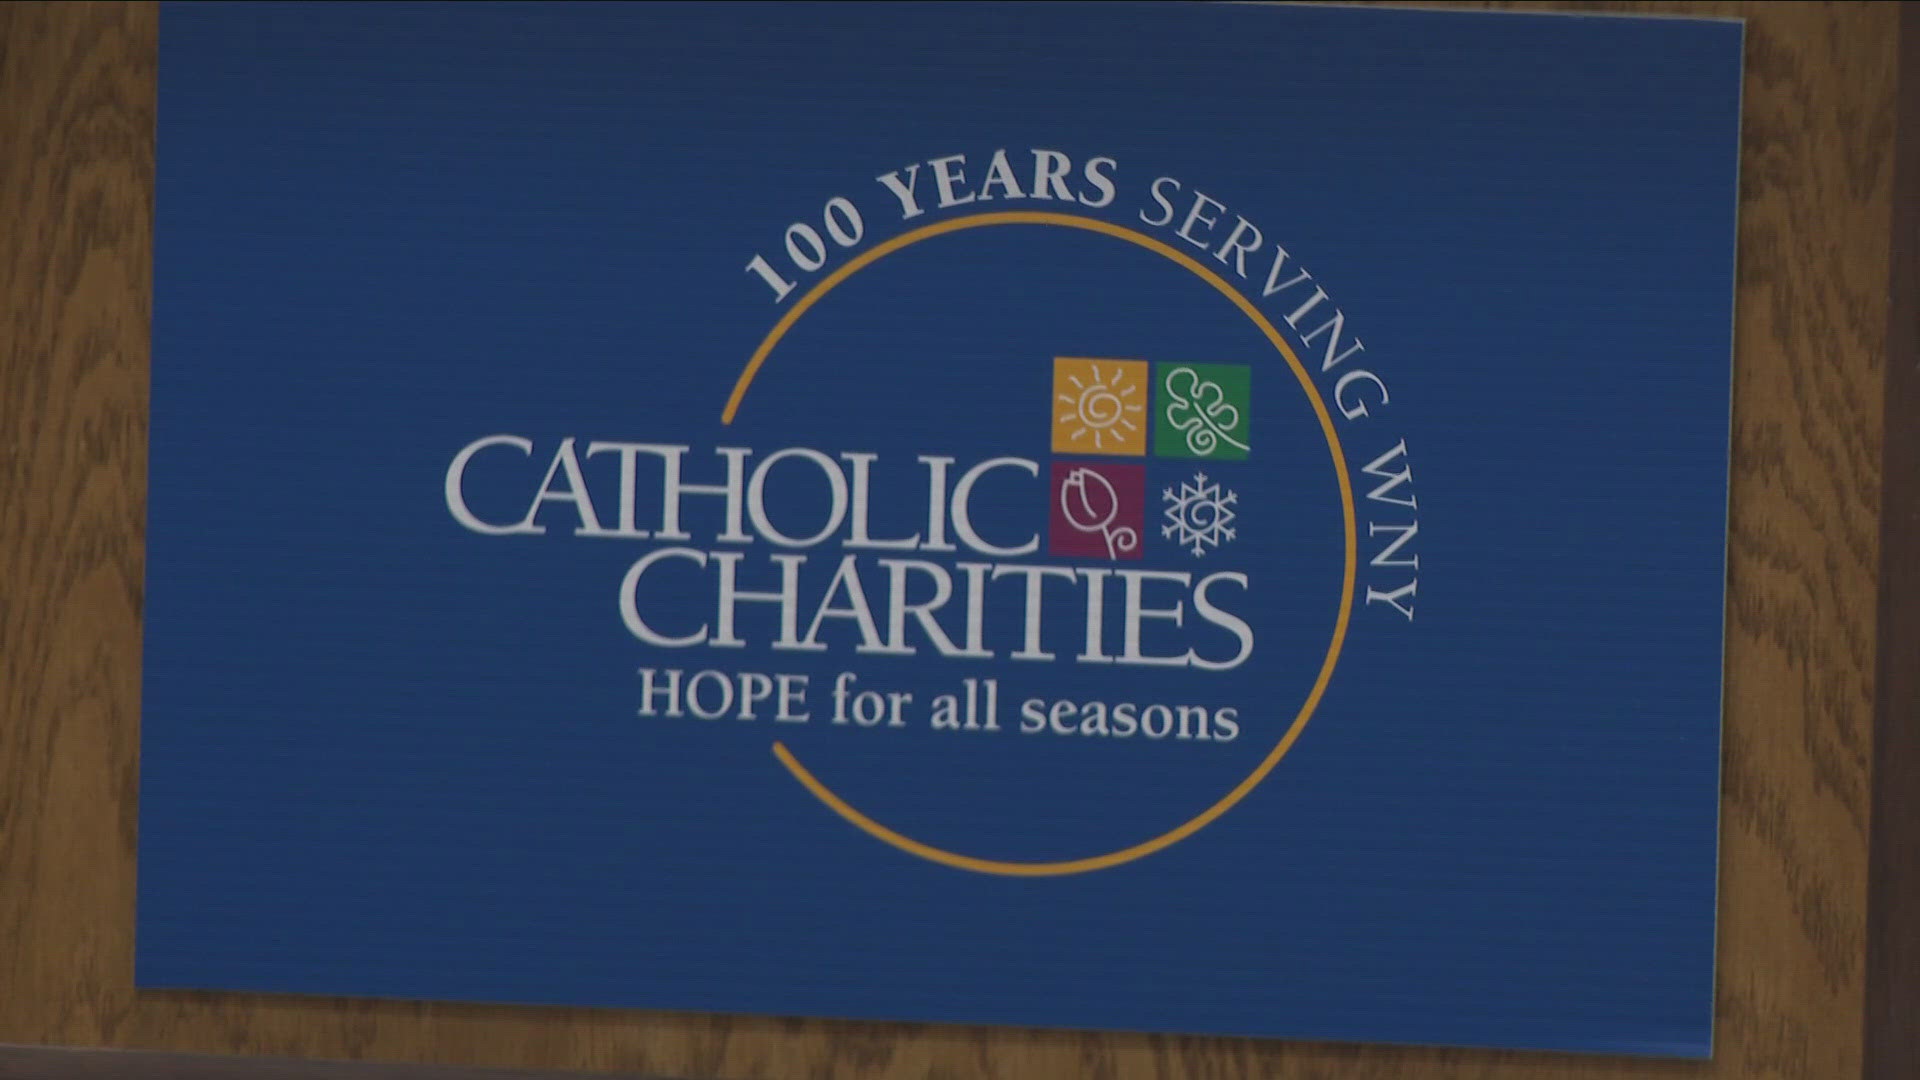 Last year Catholic Charities programs provided services for 145,000 people in the 8 counties of Western New York.